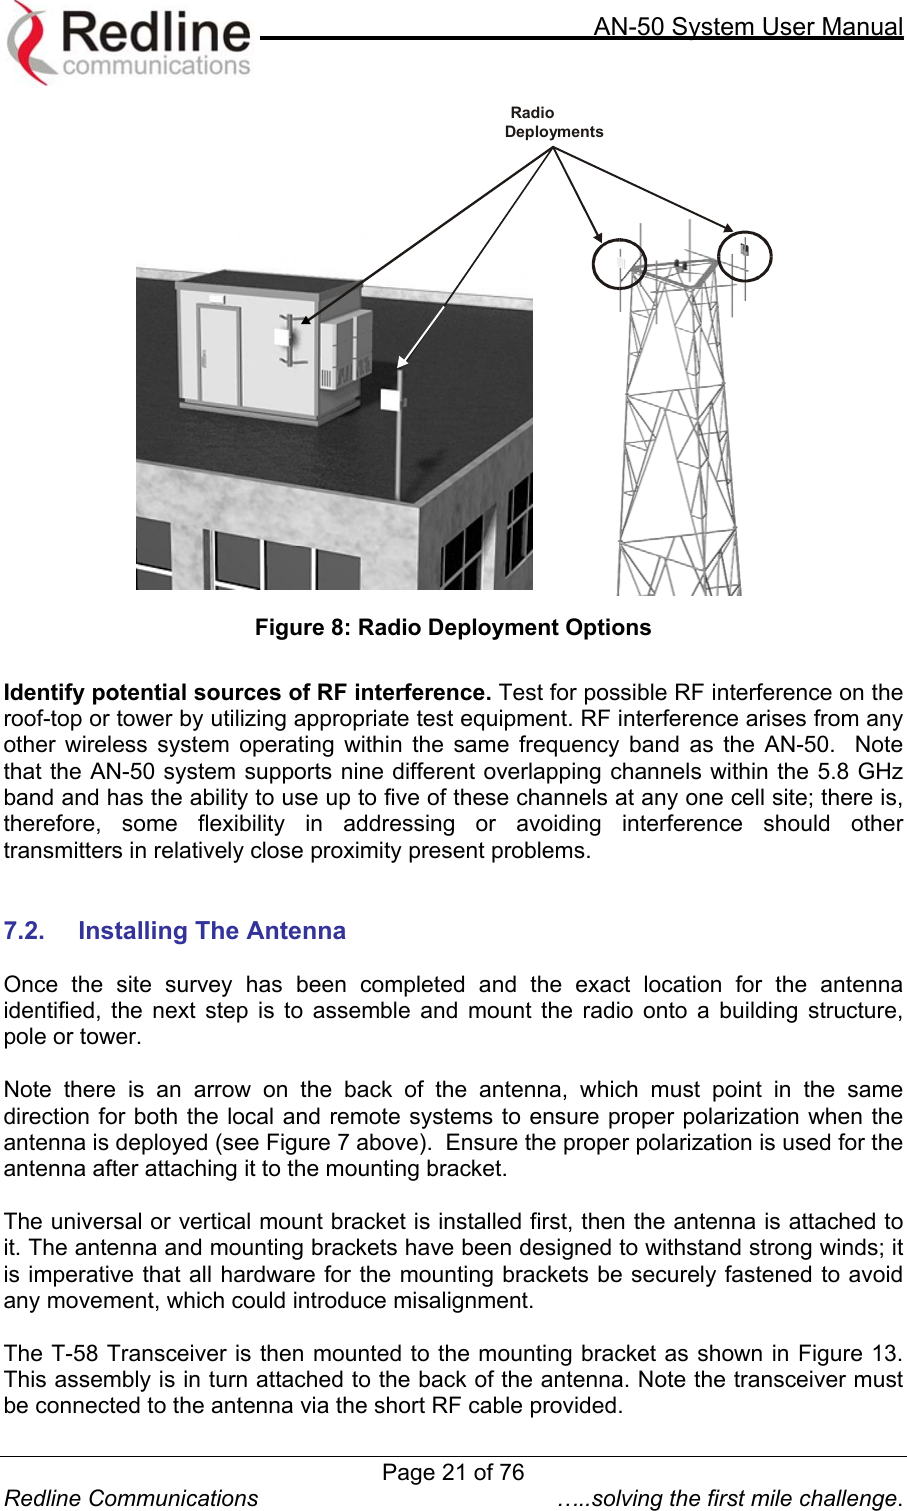     AN-50 System User Manual  Redline Communications  …..solving the first mile challenge.  RadioDeployments Figure 8: Radio Deployment Options  Identify potential sources of RF interference. Test for possible RF interference on the roof-top or tower by utilizing appropriate test equipment. RF interference arises from any other wireless system operating within the same frequency band as the AN-50.  Note that the AN-50 system supports nine different overlapping channels within the 5.8 GHz band and has the ability to use up to five of these channels at any one cell site; there is, therefore, some flexibility in addressing or avoiding interference should other transmitters in relatively close proximity present problems.       7.2.  Installing The Antenna   Once the site survey has been completed and the exact location for the antenna identified, the next step is to assemble and mount the radio onto a building structure, pole or tower.   Note there is an arrow on the back of the antenna, which must point in the same direction for both the local and remote systems to ensure proper polarization when the antenna is deployed (see Figure 7 above).  Ensure the proper polarization is used for the antenna after attaching it to the mounting bracket.  The universal or vertical mount bracket is installed first, then the antenna is attached to it. The antenna and mounting brackets have been designed to withstand strong winds; it is imperative that all hardware for the mounting brackets be securely fastened to avoid any movement, which could introduce misalignment.   The T-58 Transceiver is then mounted to the mounting bracket as shown in Figure 13.  This assembly is in turn attached to the back of the antenna. Note the transceiver must be connected to the antenna via the short RF cable provided.   Page 21 of 76